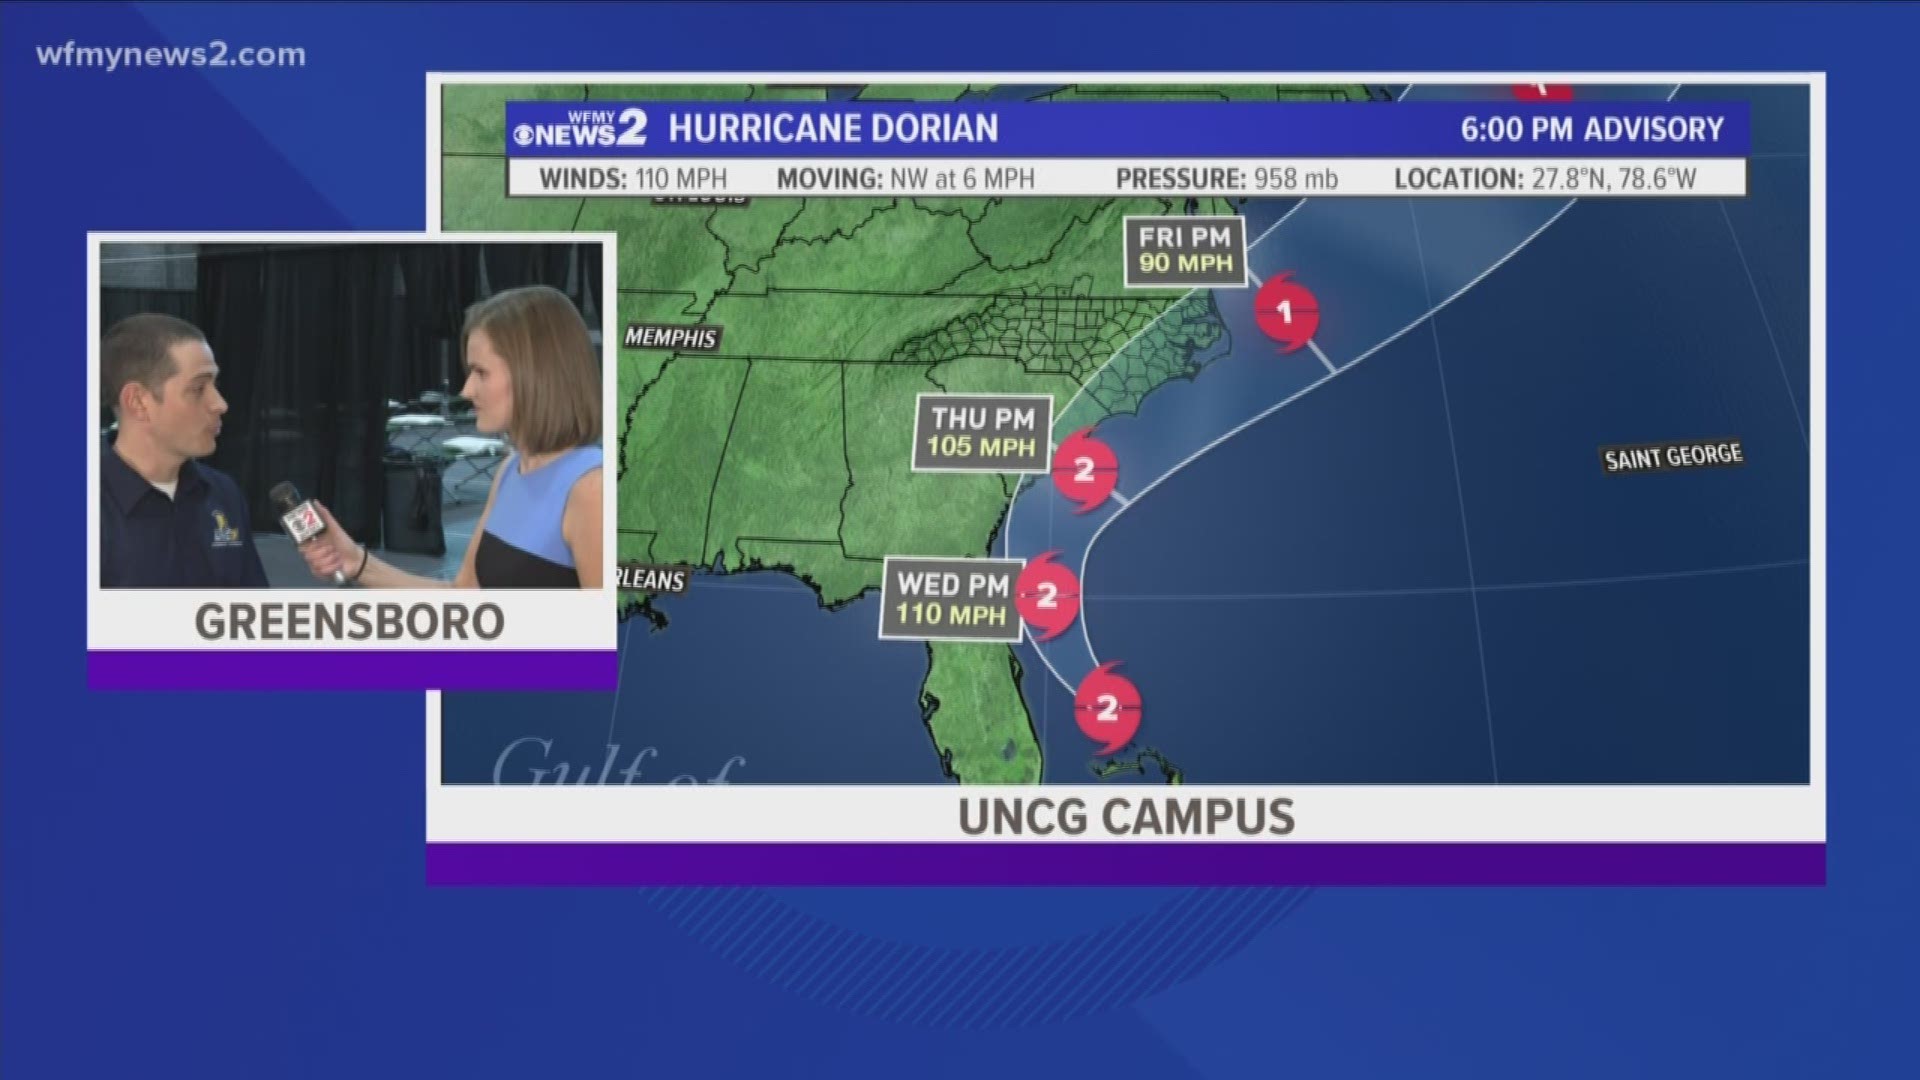 This is something UNCG has prepared for before in an operation called 'Hurricane Zephyr'.